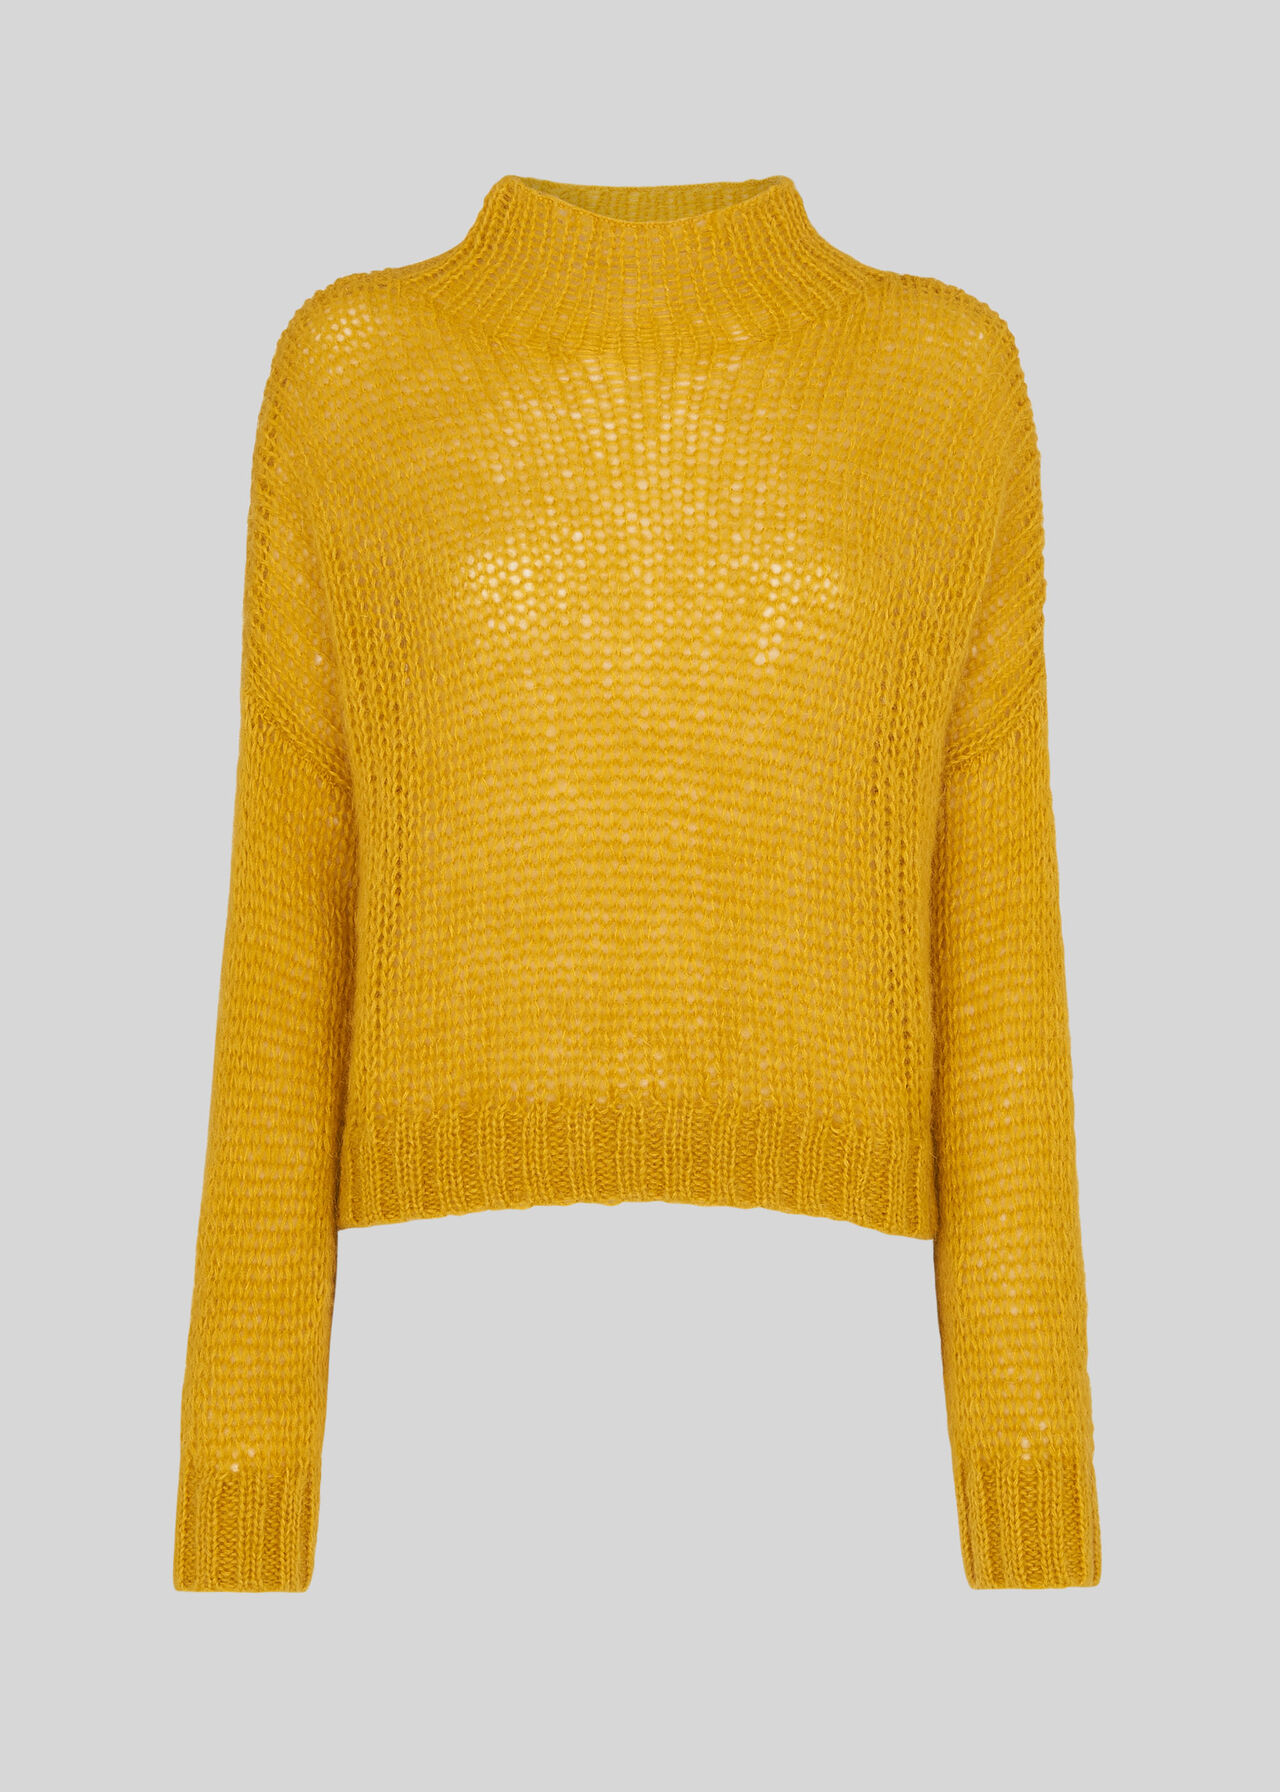 Oversized Textured Knit Yellow